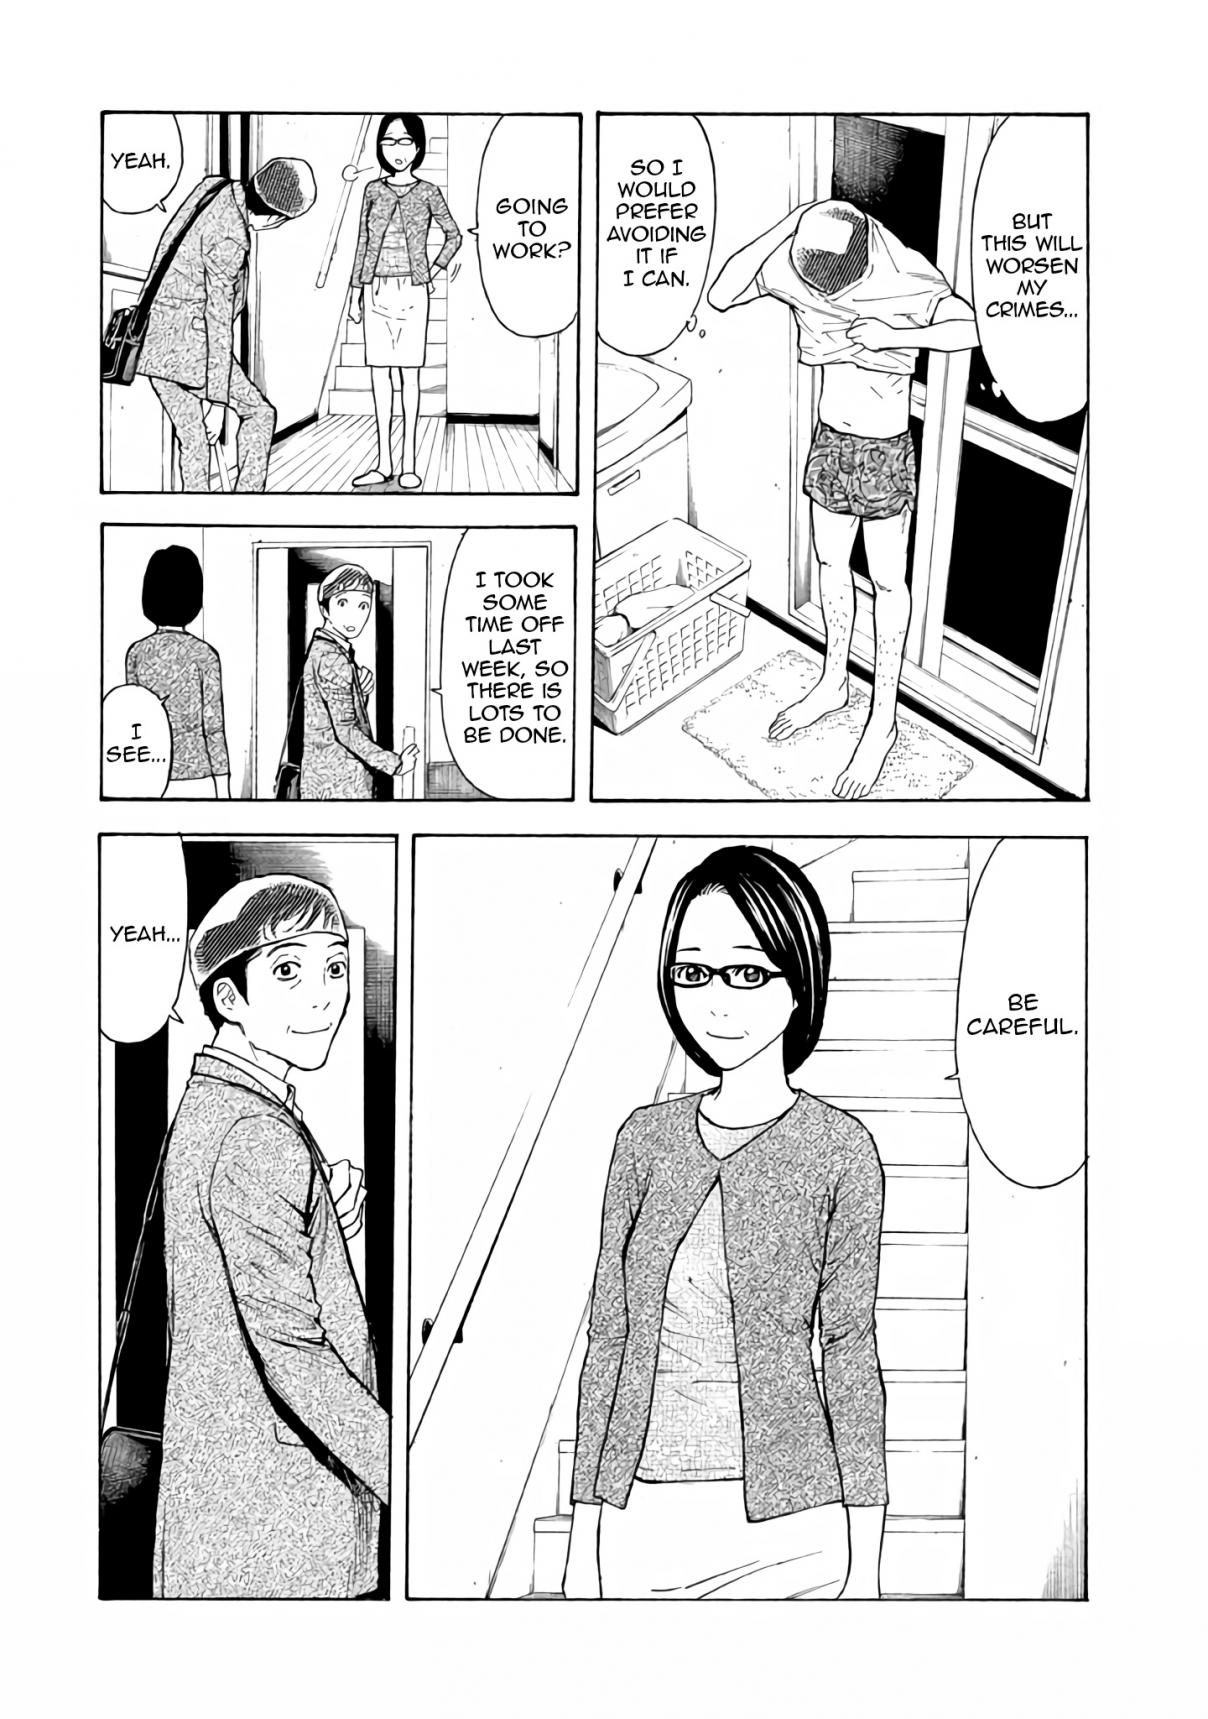 My Home Hero Vol. 2 Ch. 13 Returning to My Ordinary Home